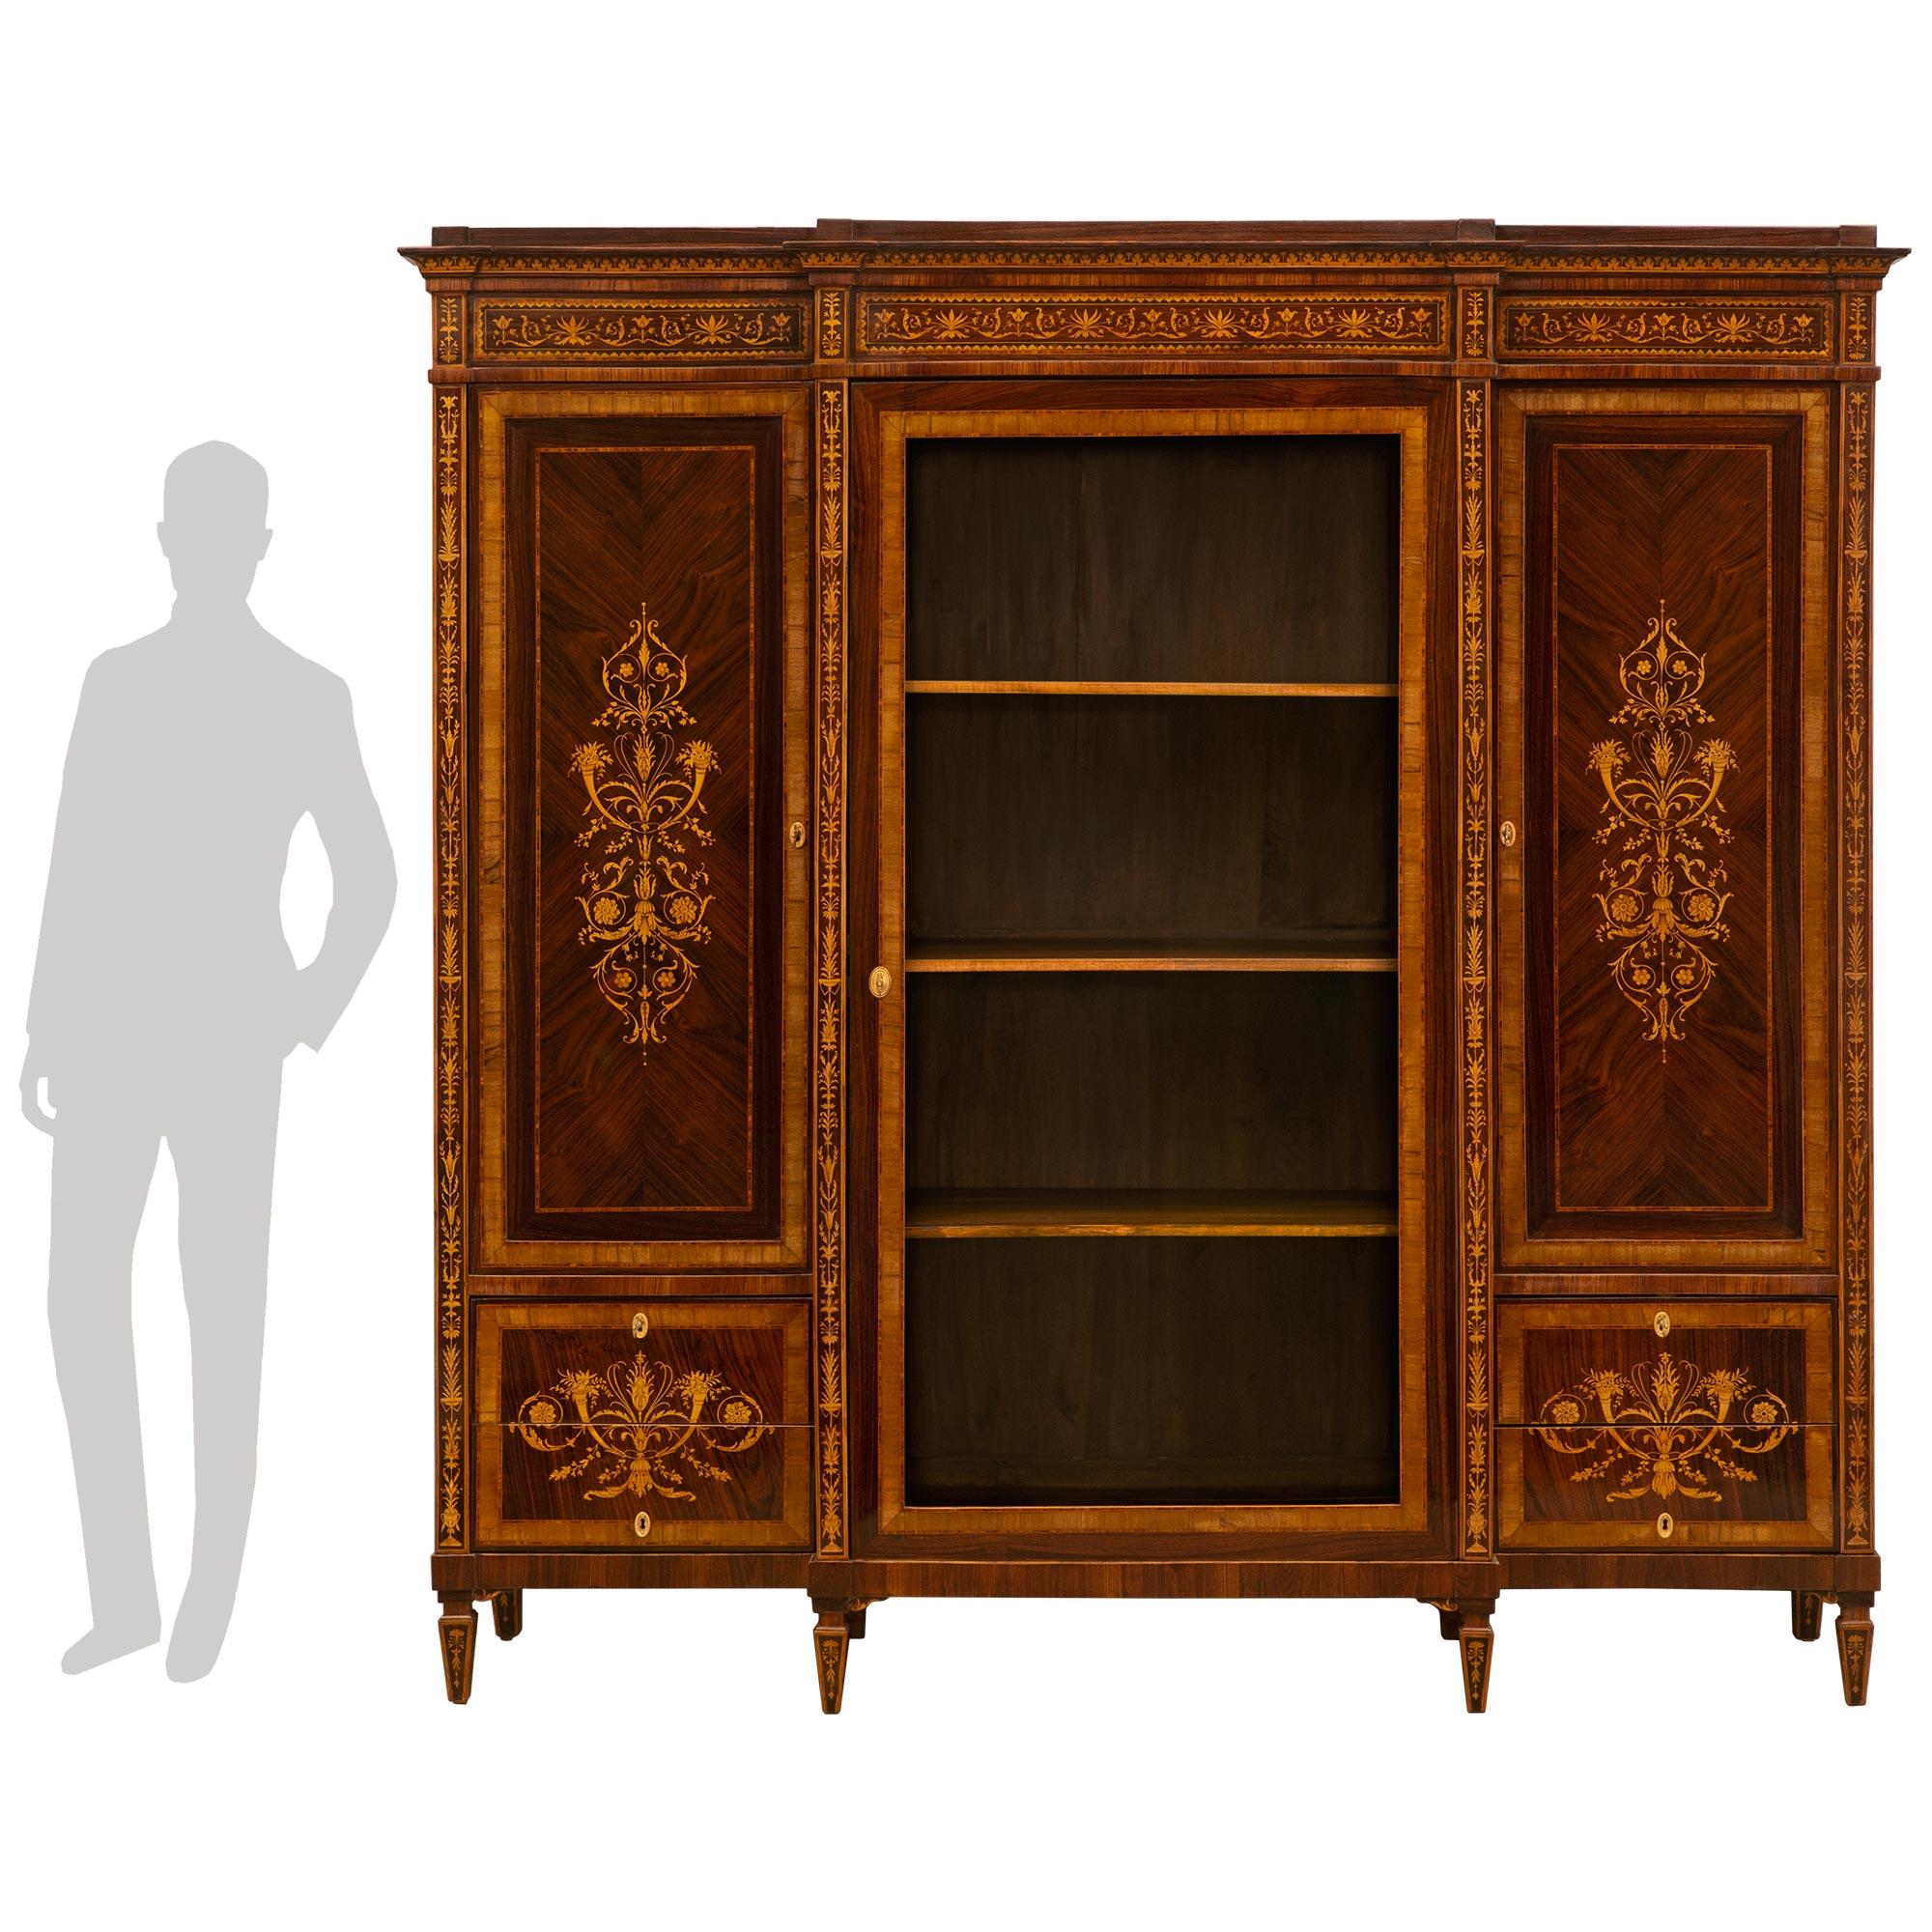 An impressive Italian 19th century Neo-Classical st. walnut cabinet vitrine in the manner of Maggiolini. The cabinet is raised on eight square tappered supports with elegant maple wood inlays. Above the straight frieze at each side are striking